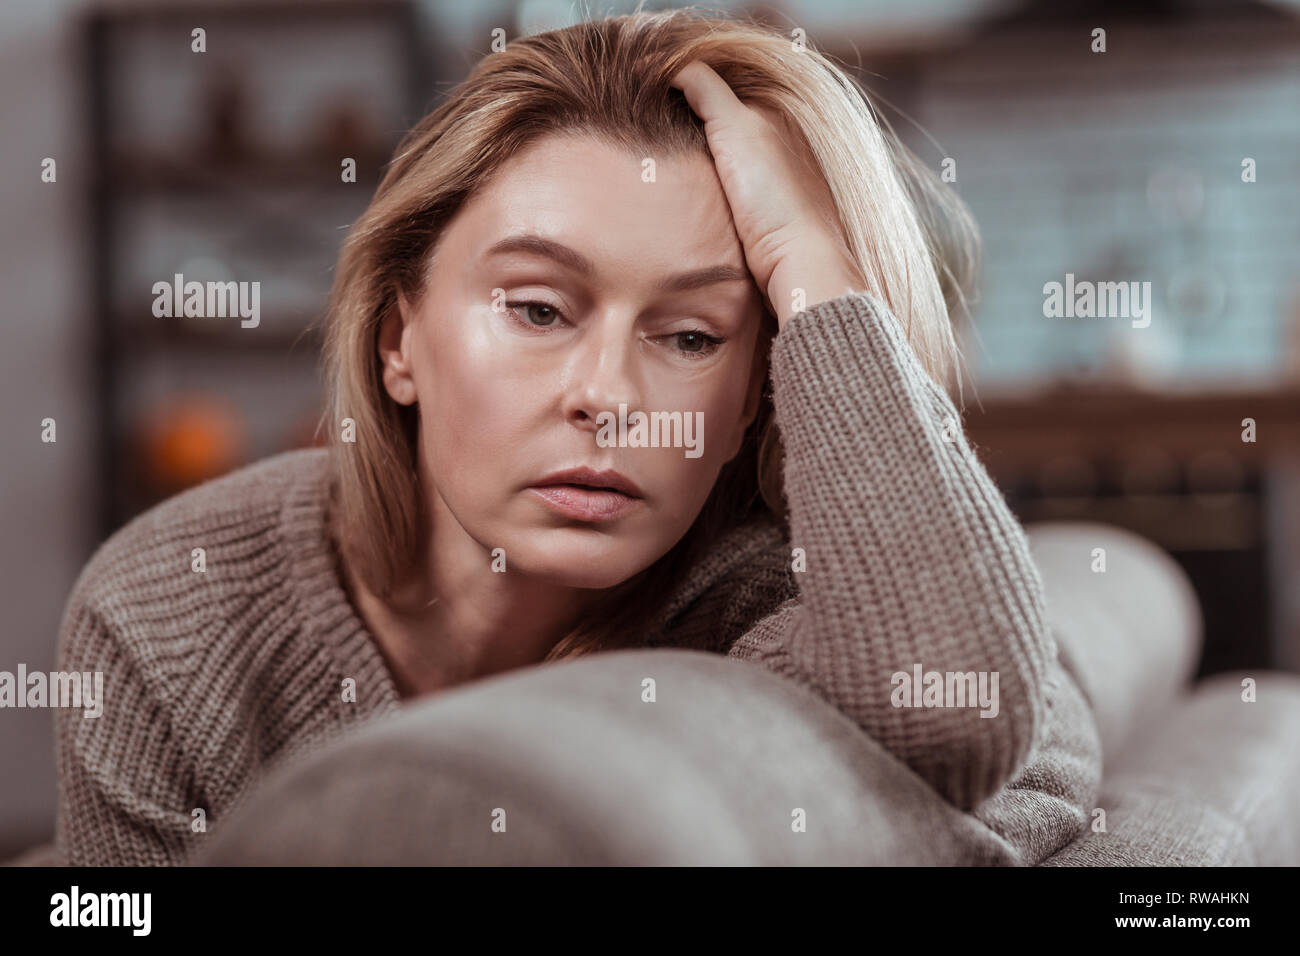 Pleasant appealing woman feeling depressed after divorce Stock Photo